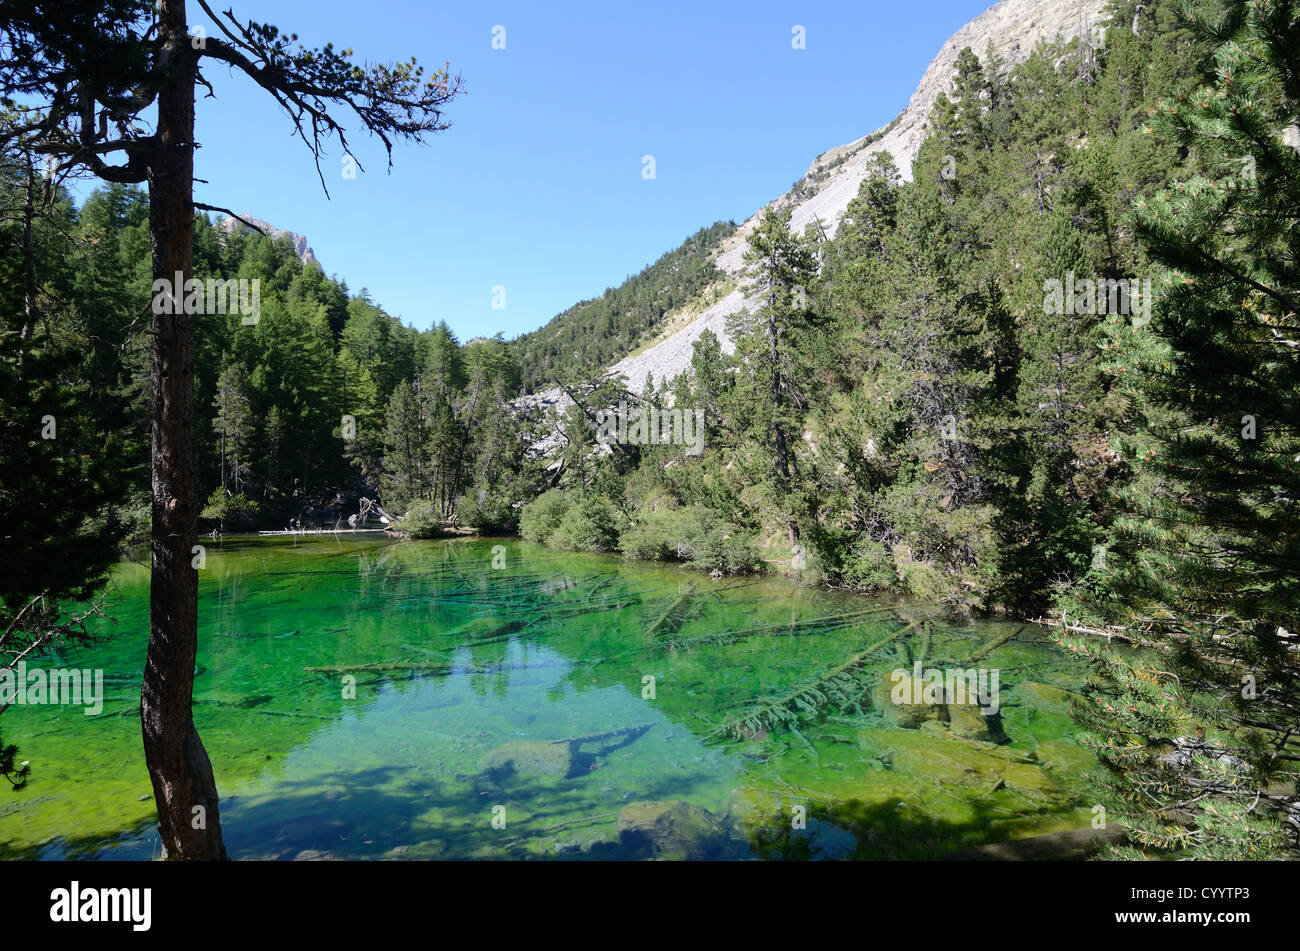 The Beautiful Fir-Lined Lac Vert or Green Lake Etroite Valley or Vallée Etroite Névache Hautes-Alpes Franch Alps France Stock Photo